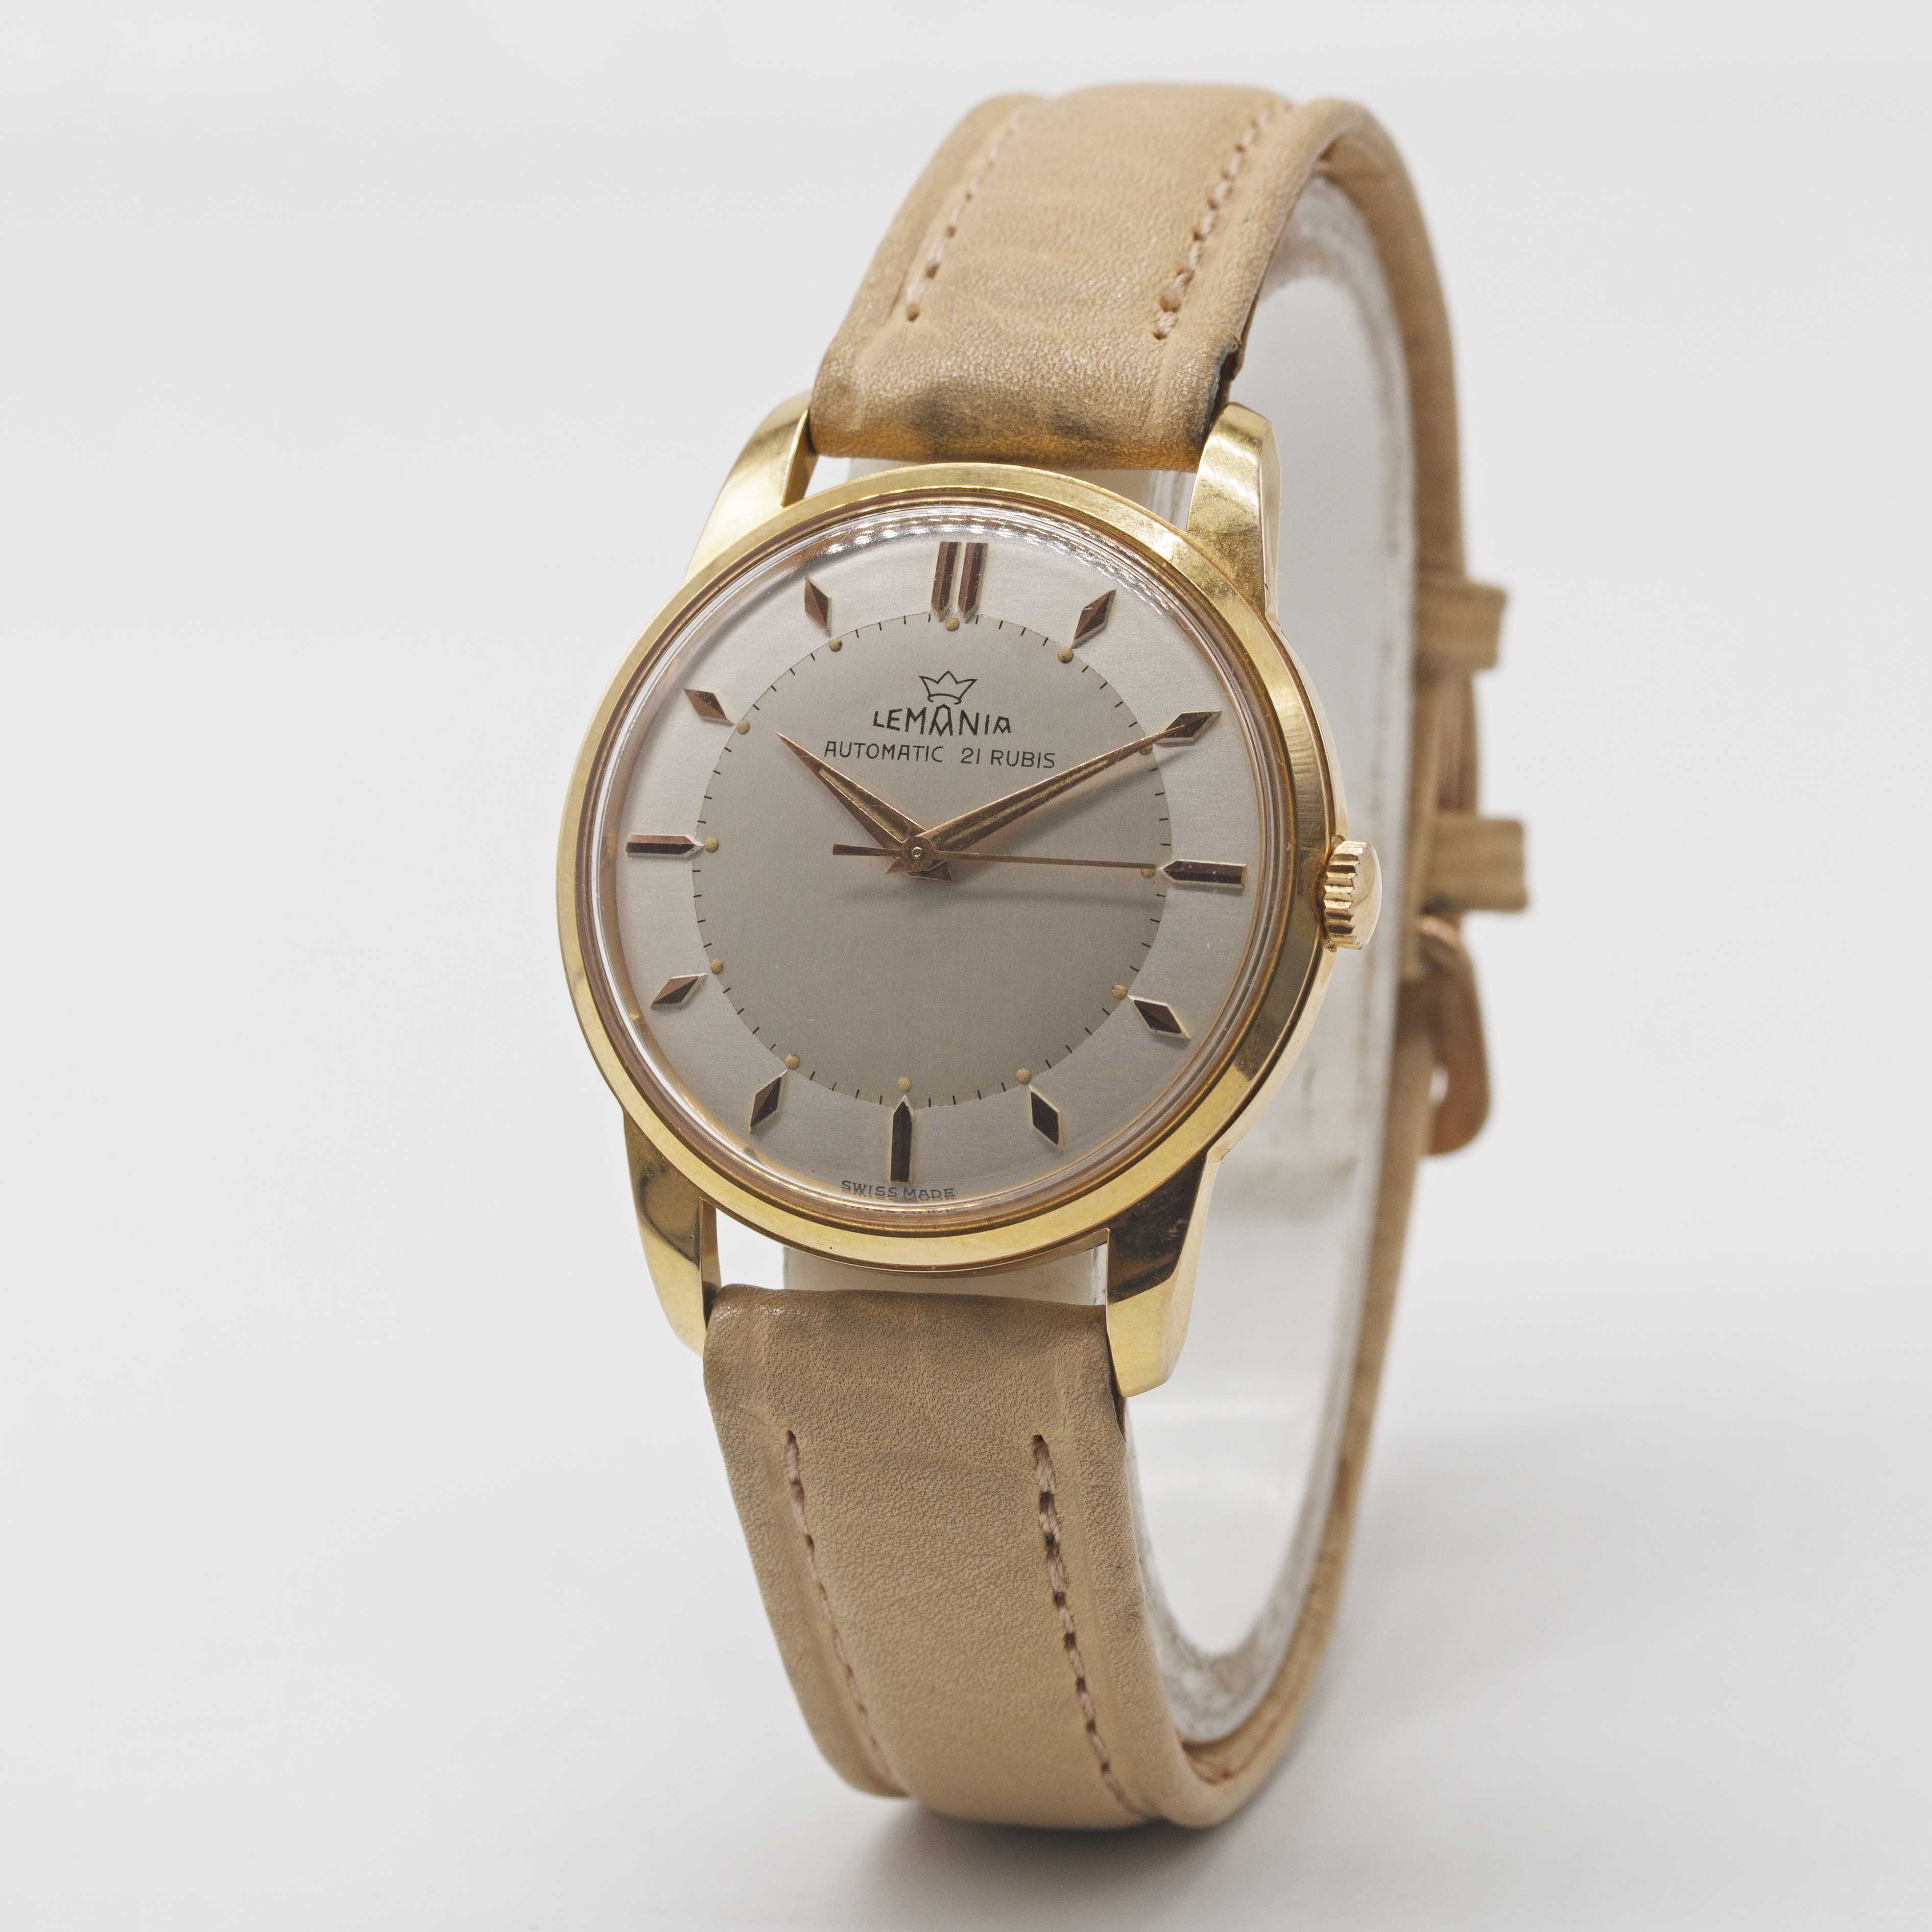 A GENTLEMAN'S "NOS' GOLD PLATED LEMANIA AUTOMATIC WRIST WATCH CIRCA 1950s, TWO TONE SILVER DIAL & - Image 3 of 5